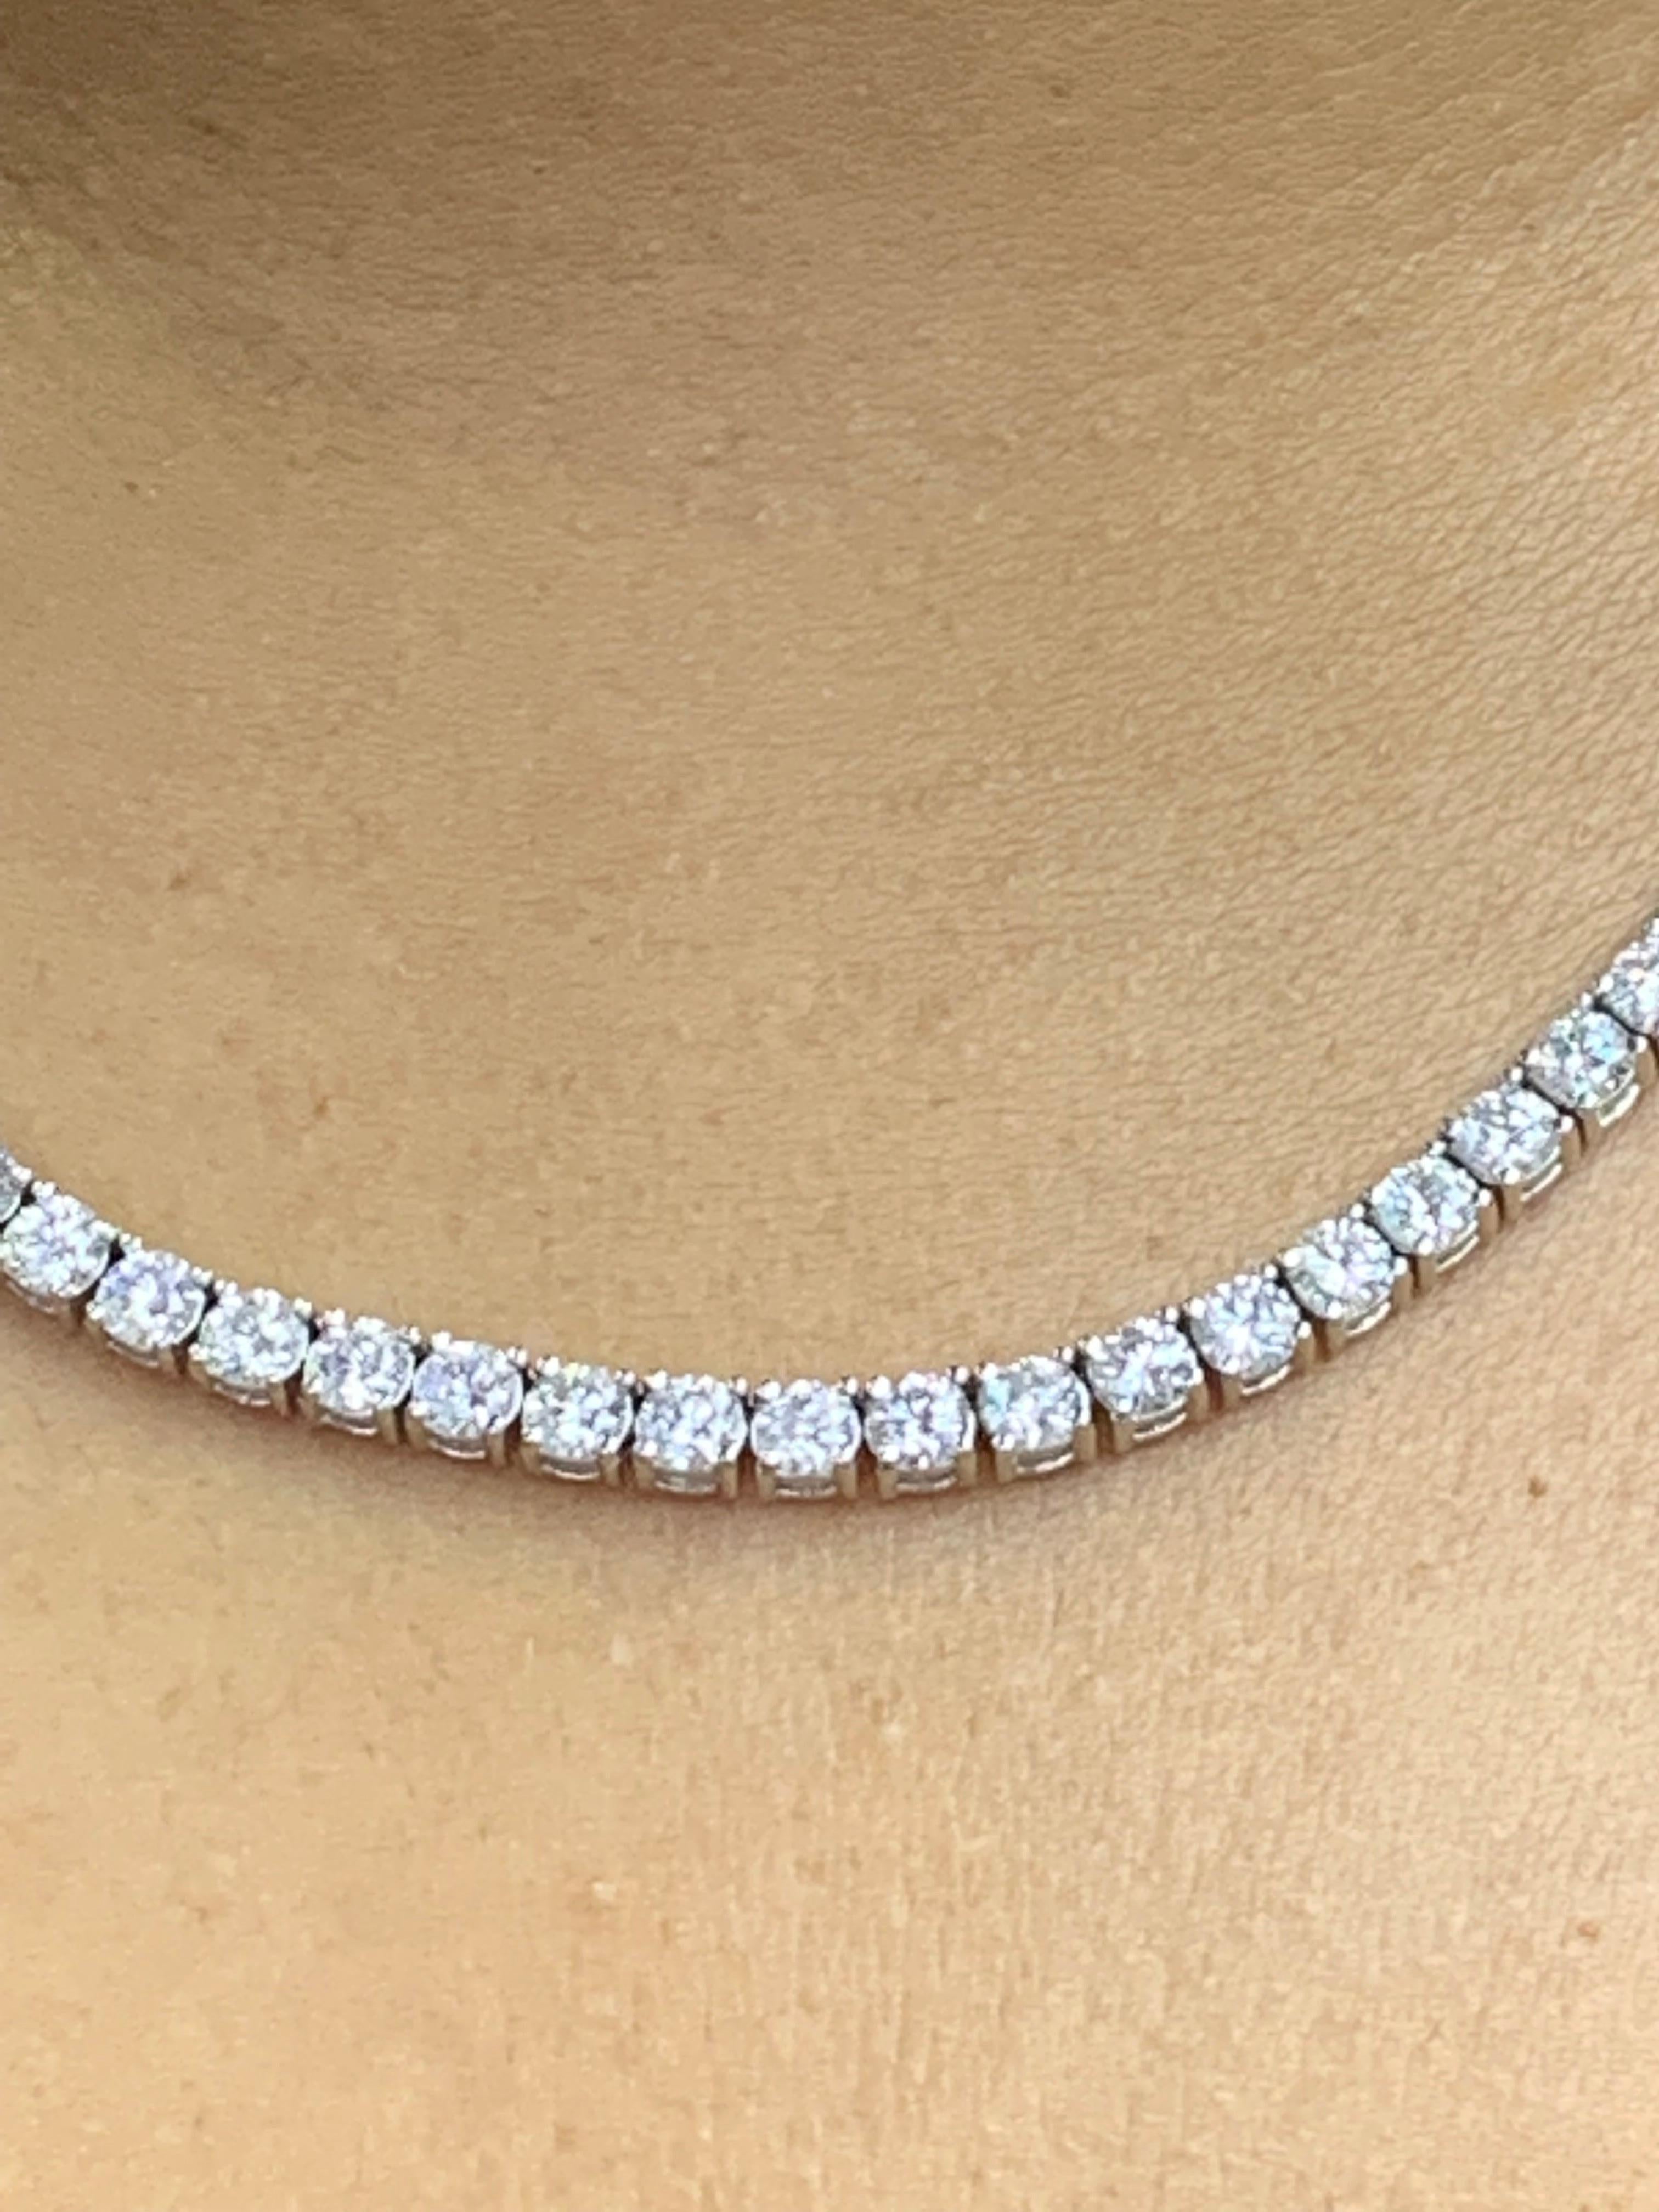 18 Carat Diamond Tennis Necklace in 14K White Gold For Sale 5